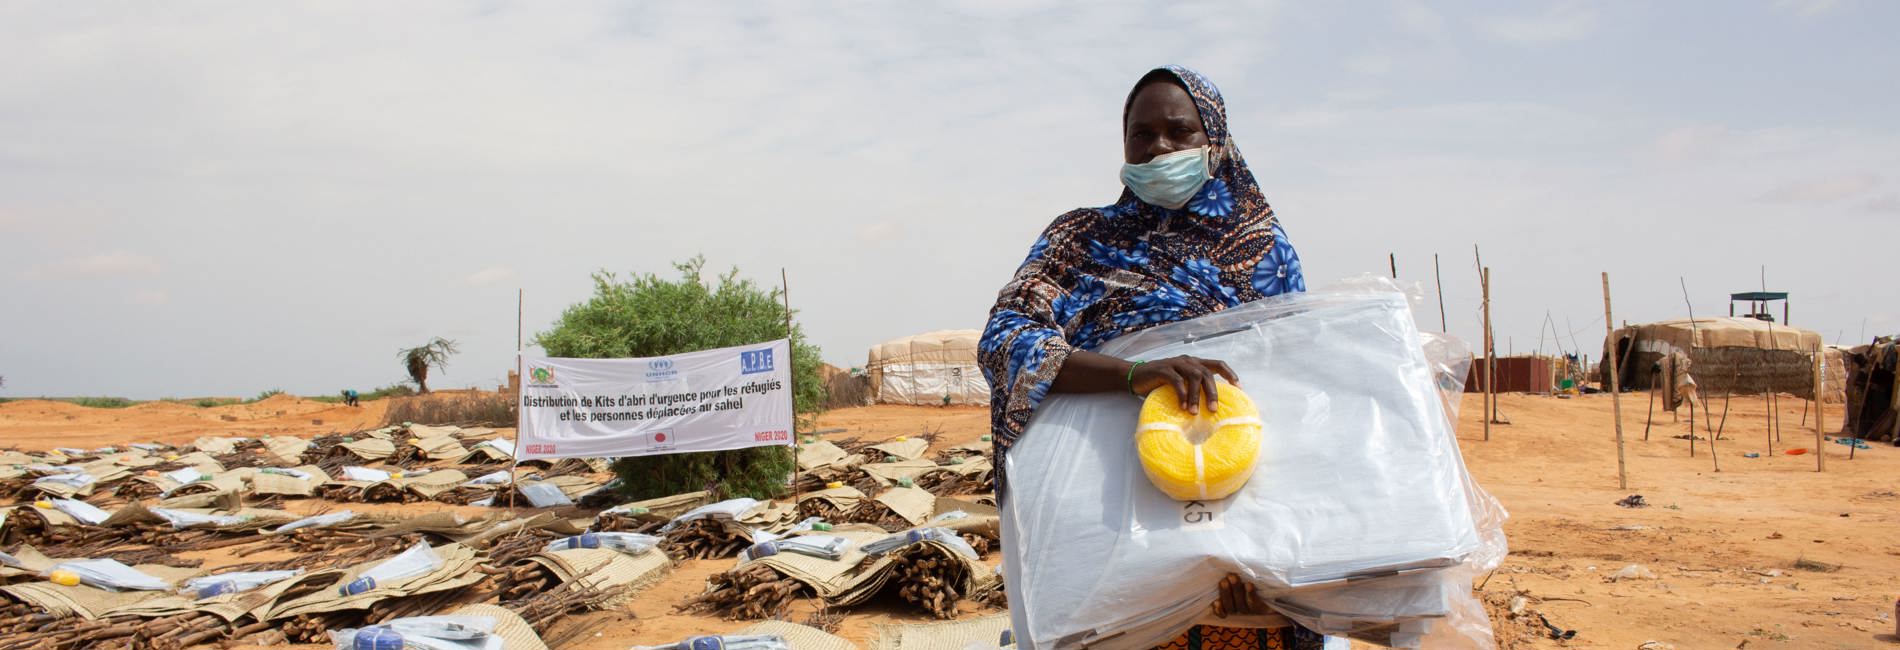 Woman standing with shelter kit. UNHCR emergency shelter kits help displaced persons in Niger.